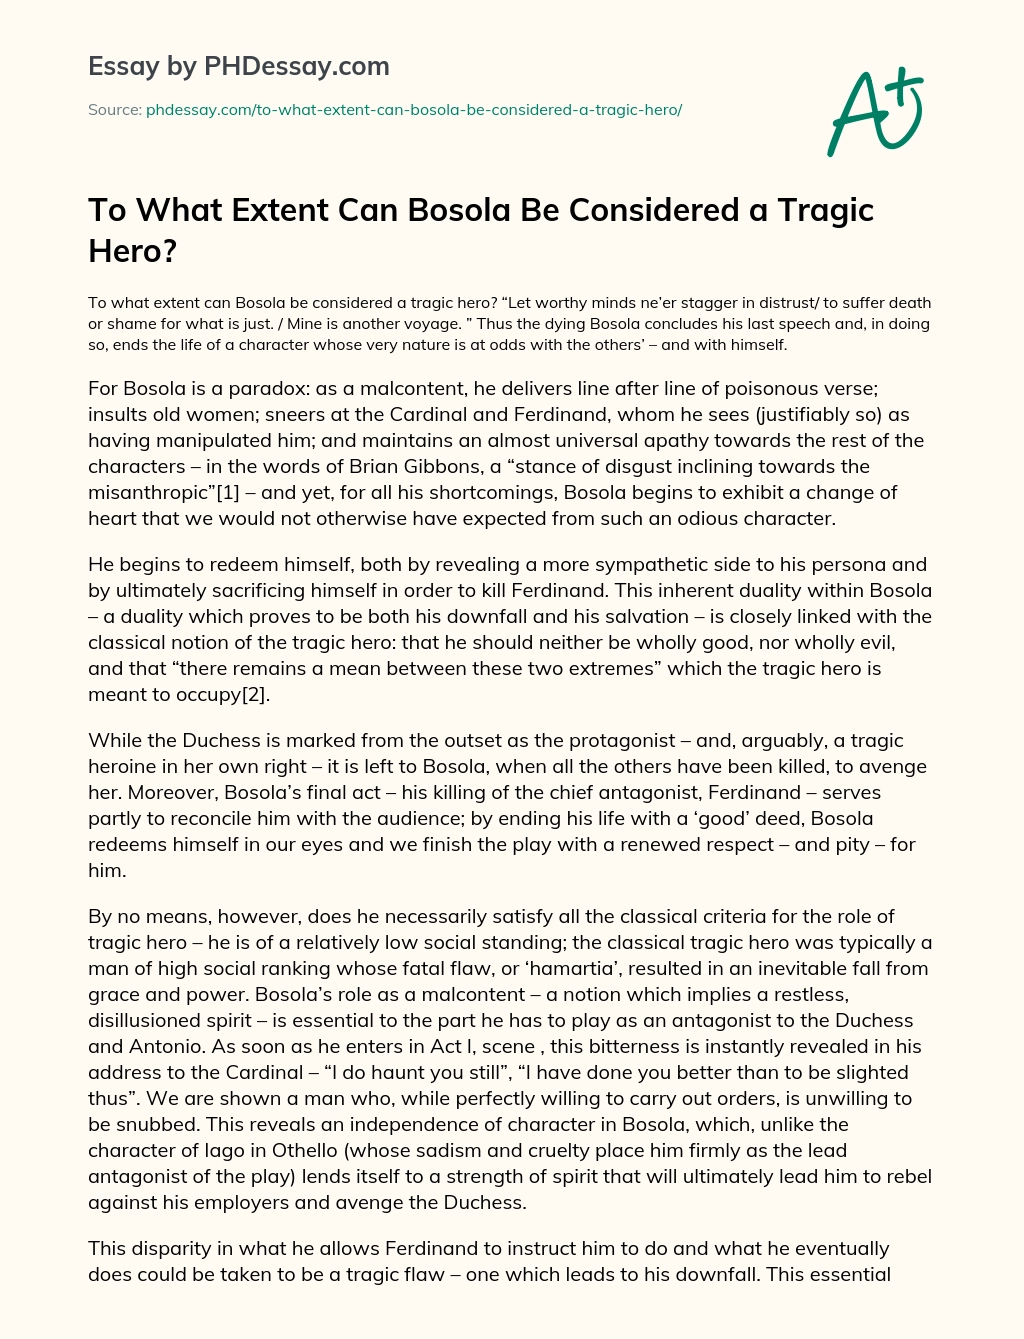 To What Extent Can Bosola Be Considered a Tragic Hero essay